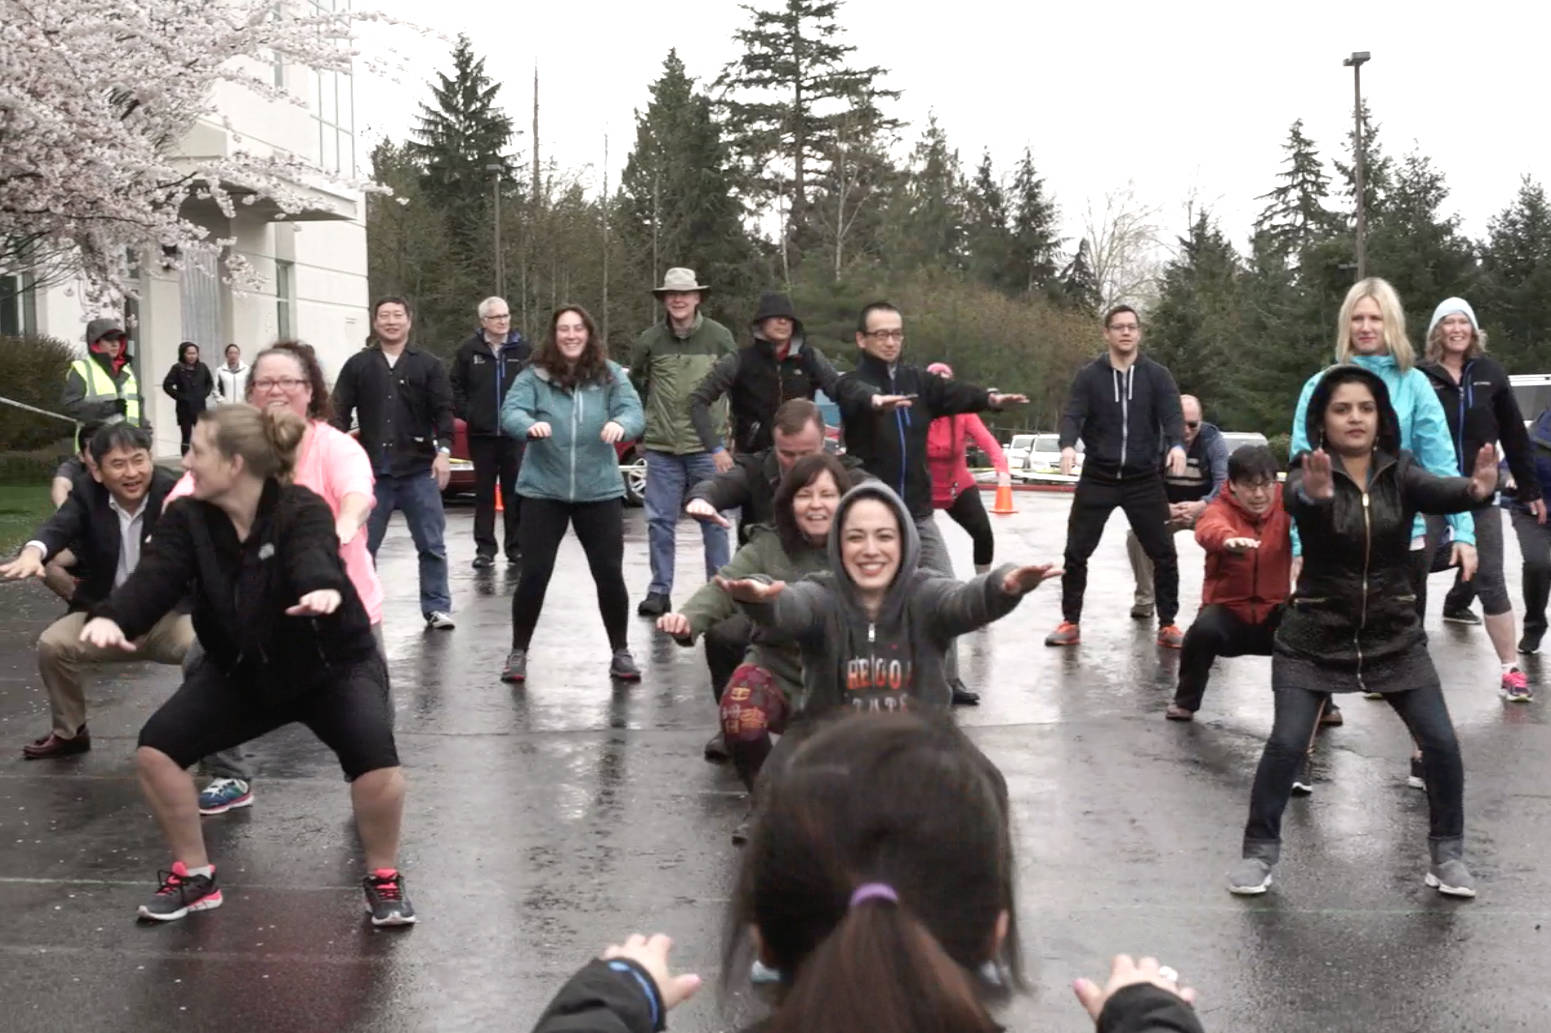 Fujifilm SonoSite, Inc. had 71 employees in Bothell participate in the Fujifilm initiative to break the Guinness World Record for the most people performing air squats for one minute. Contributed photo